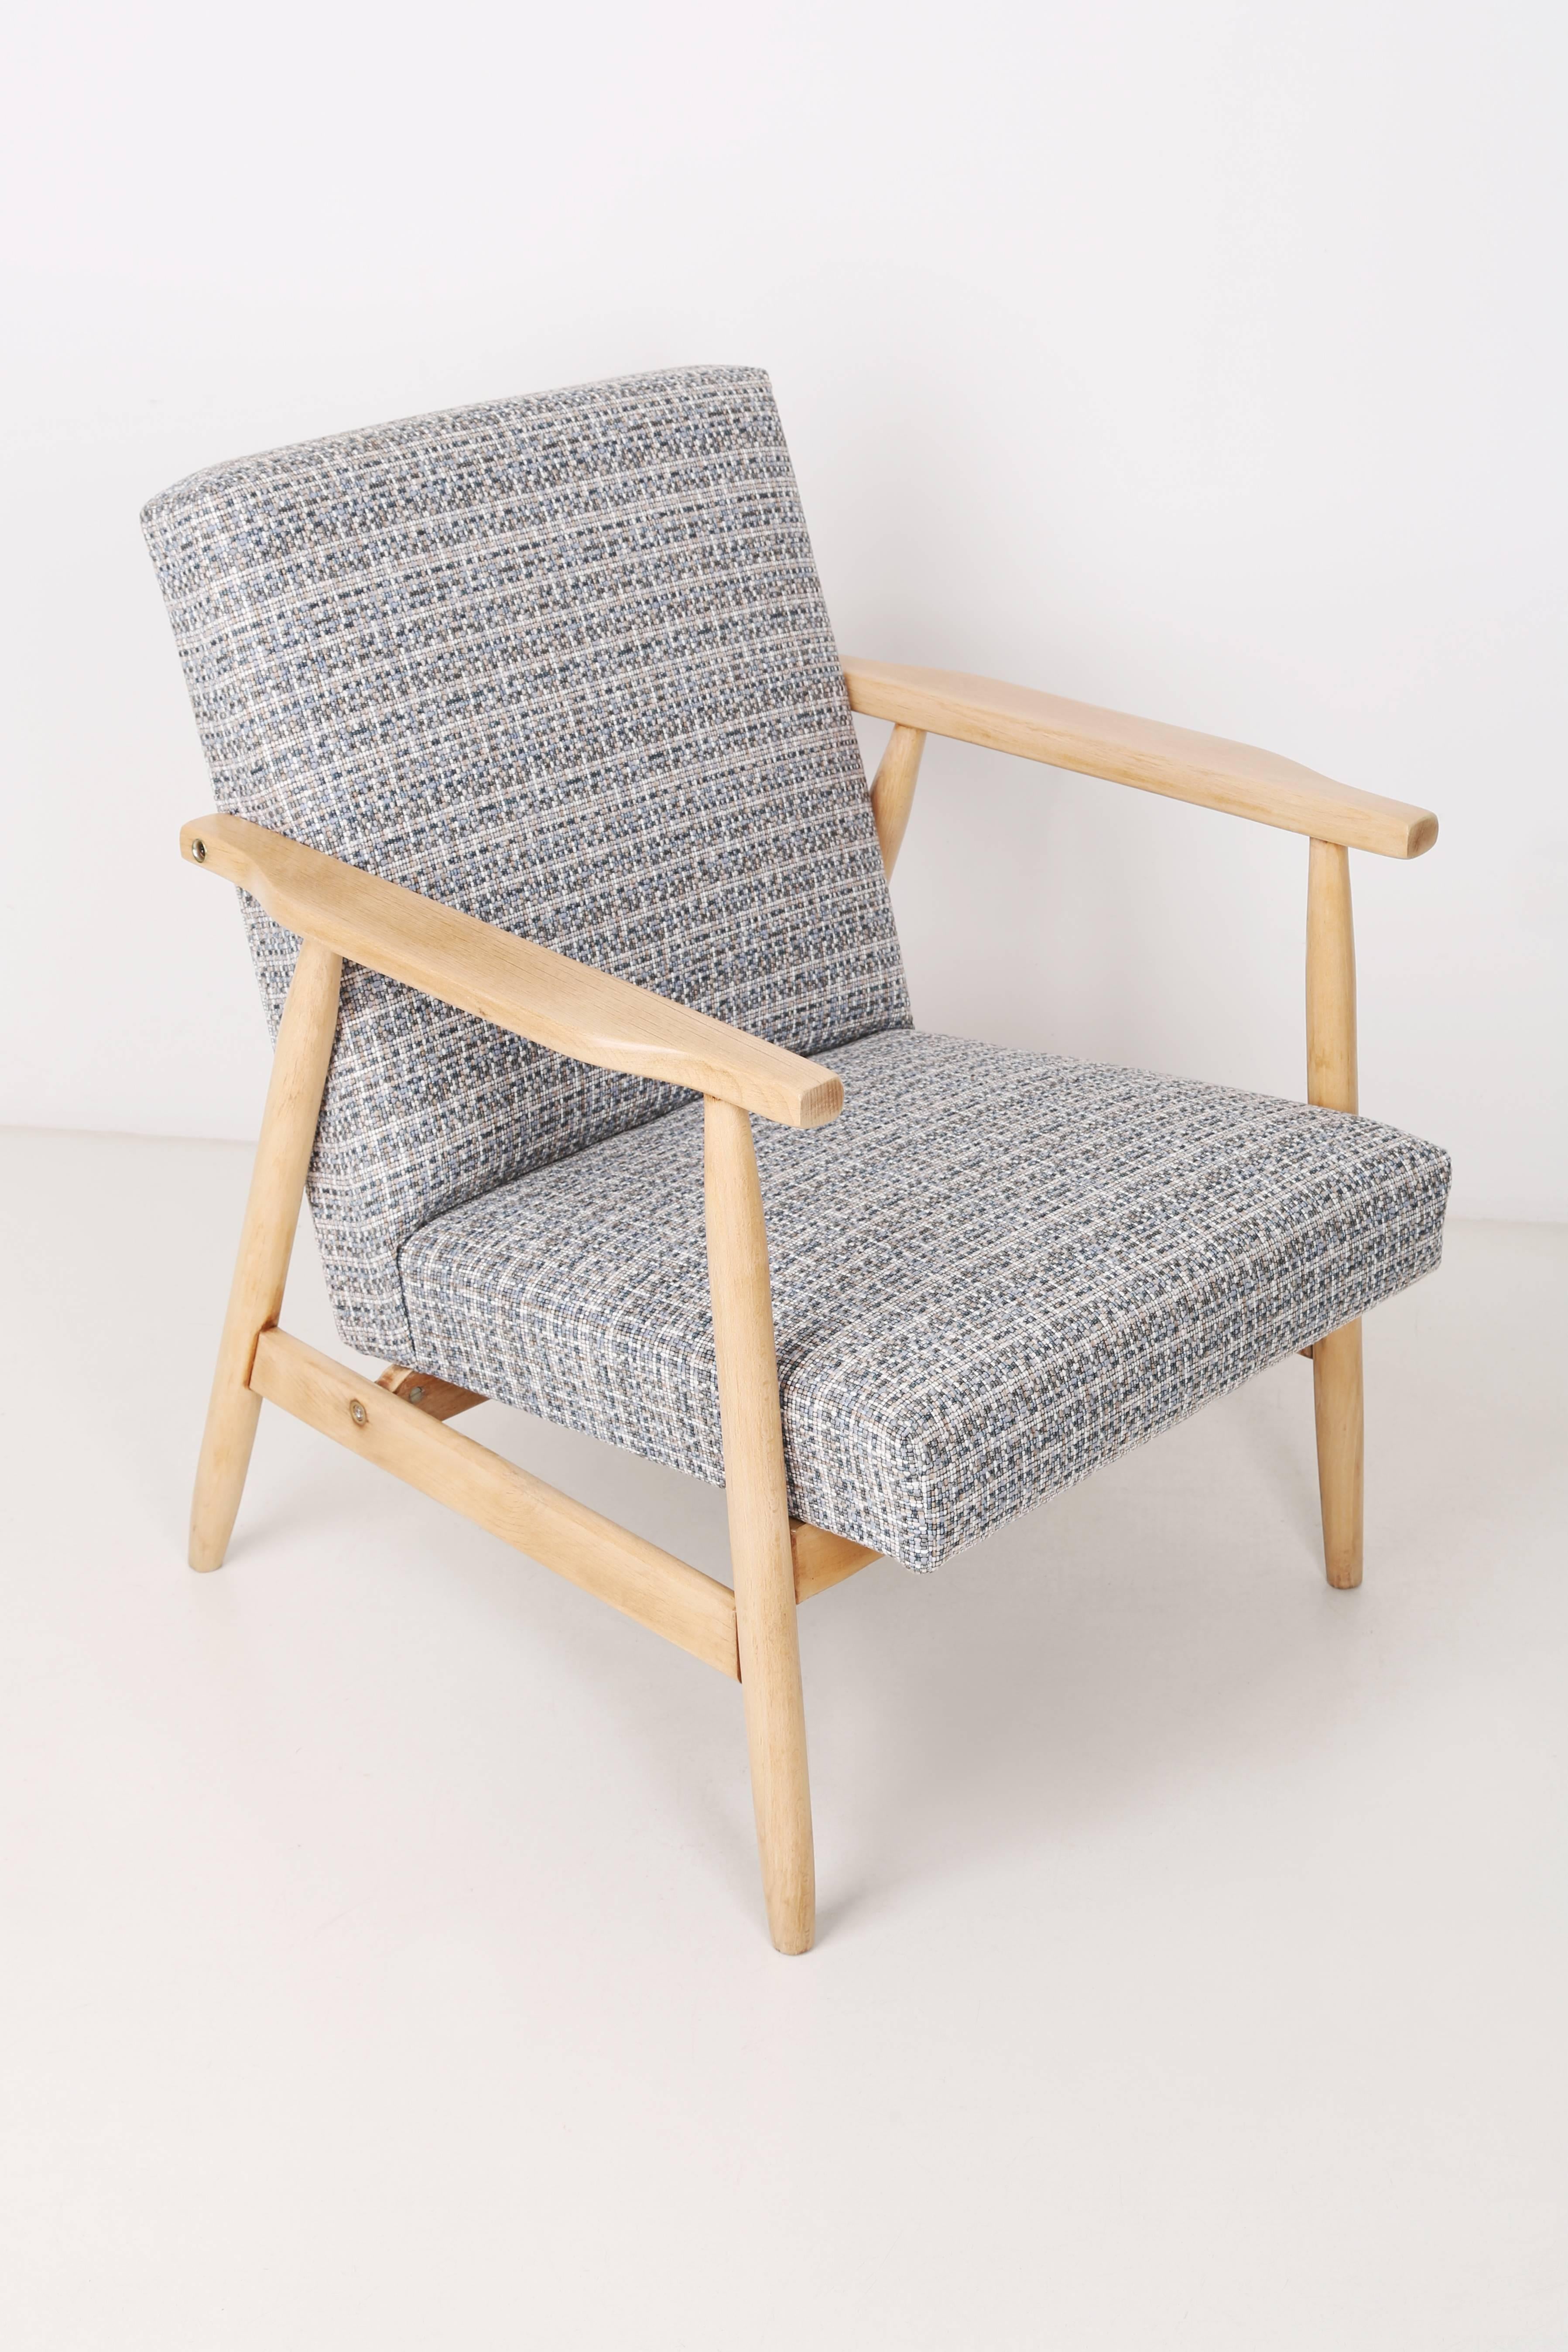 A very comfortable, stabile chair designed in the 1960s. It was made in Poland. The armchair is after full professional upholstery and carpentry renovation. The seat is covered with high quality fabric with a small pattern. We can prepare this